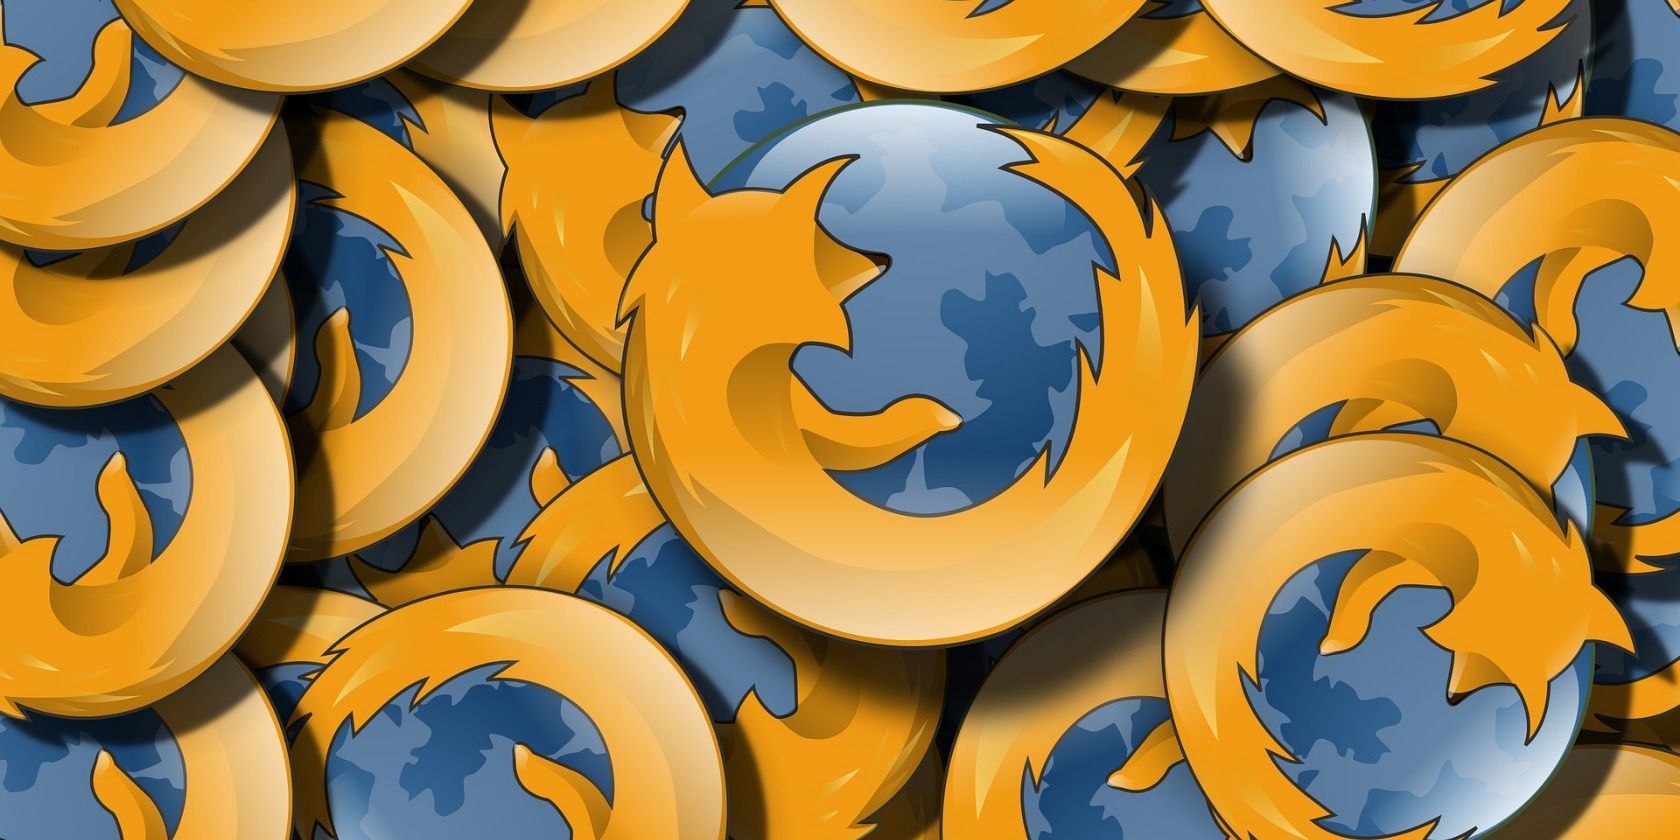 Multiple Firefox logos in one image